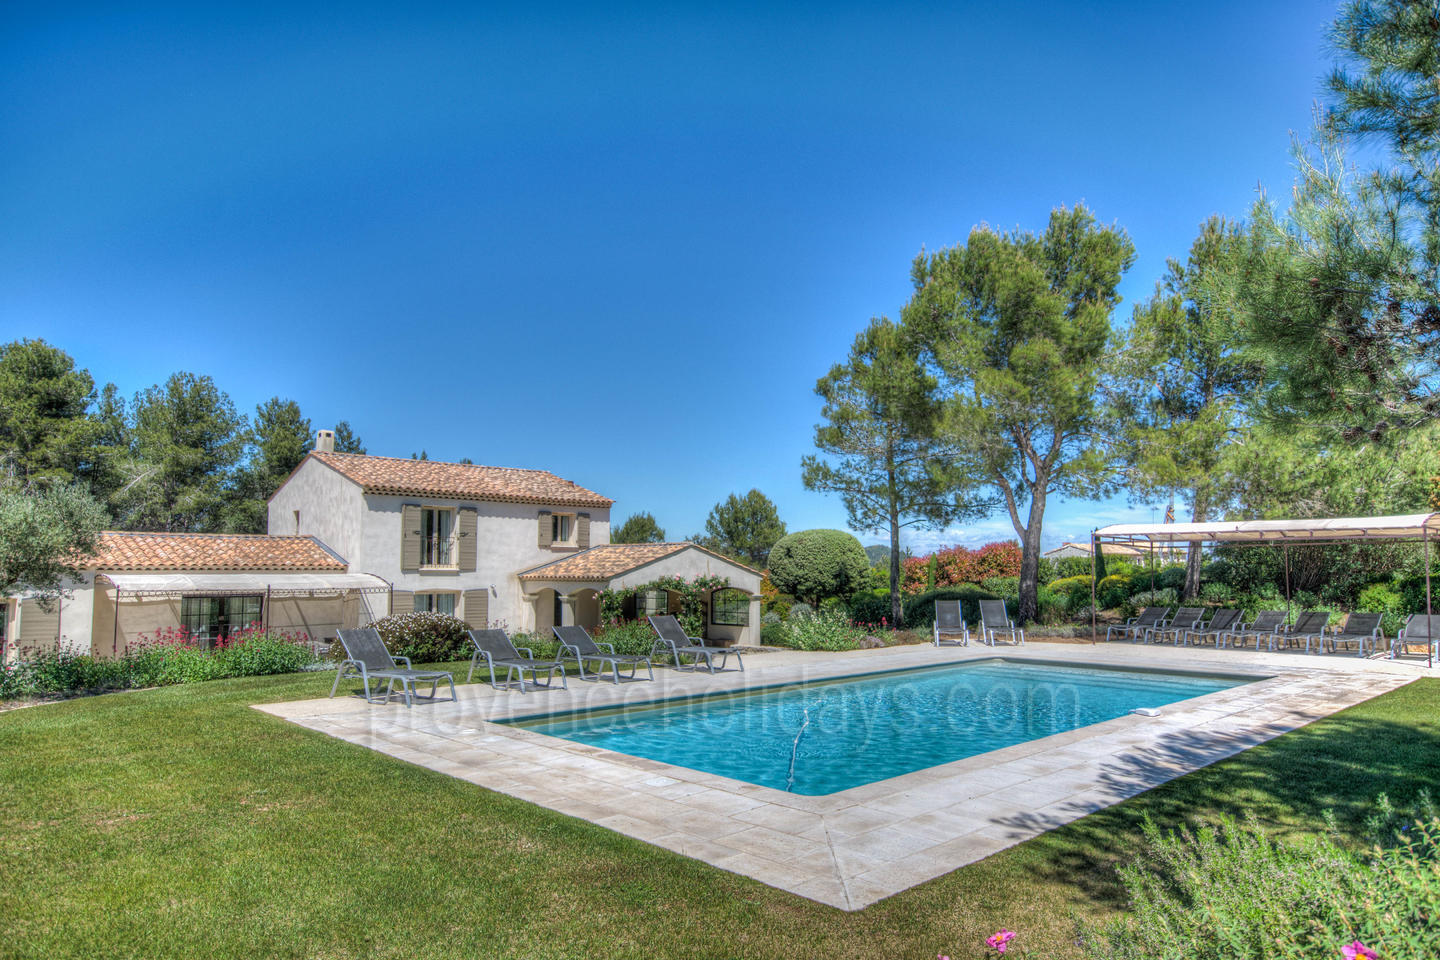 Holiday rental with heated swimming pool in Eygalières 1 - Chez Marie Therèse: Villa: Pool